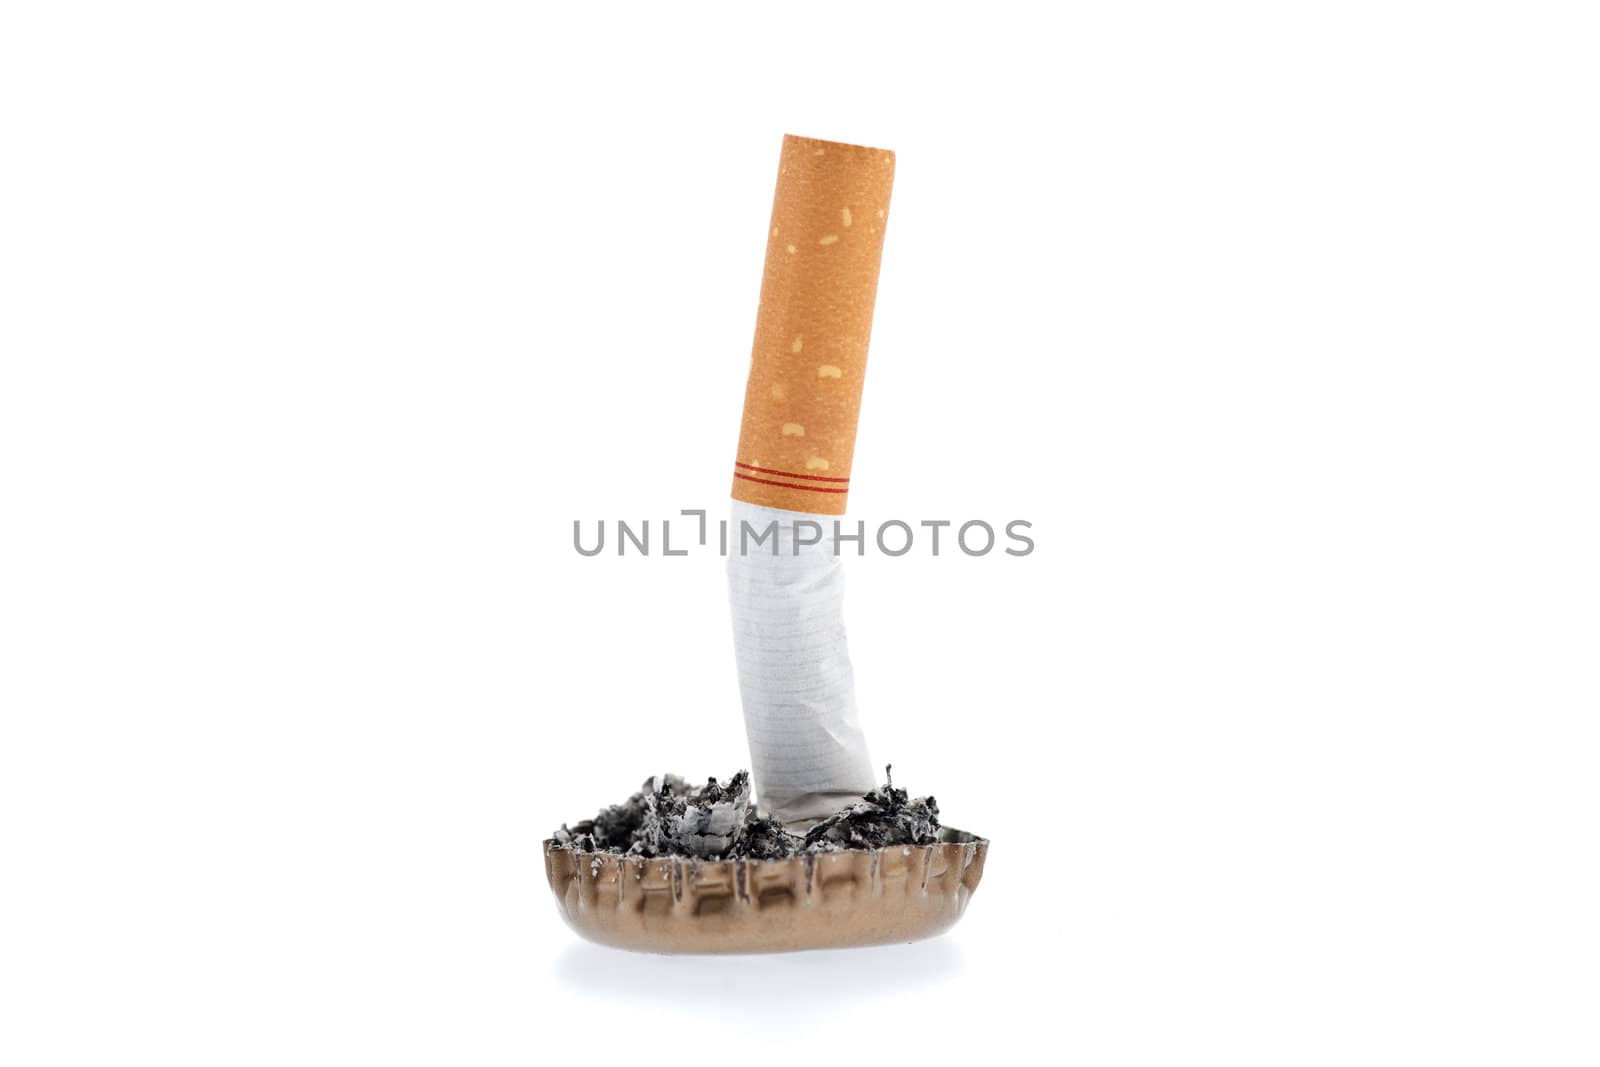 Cigarette butt and ash in a bottle cap by Marcus